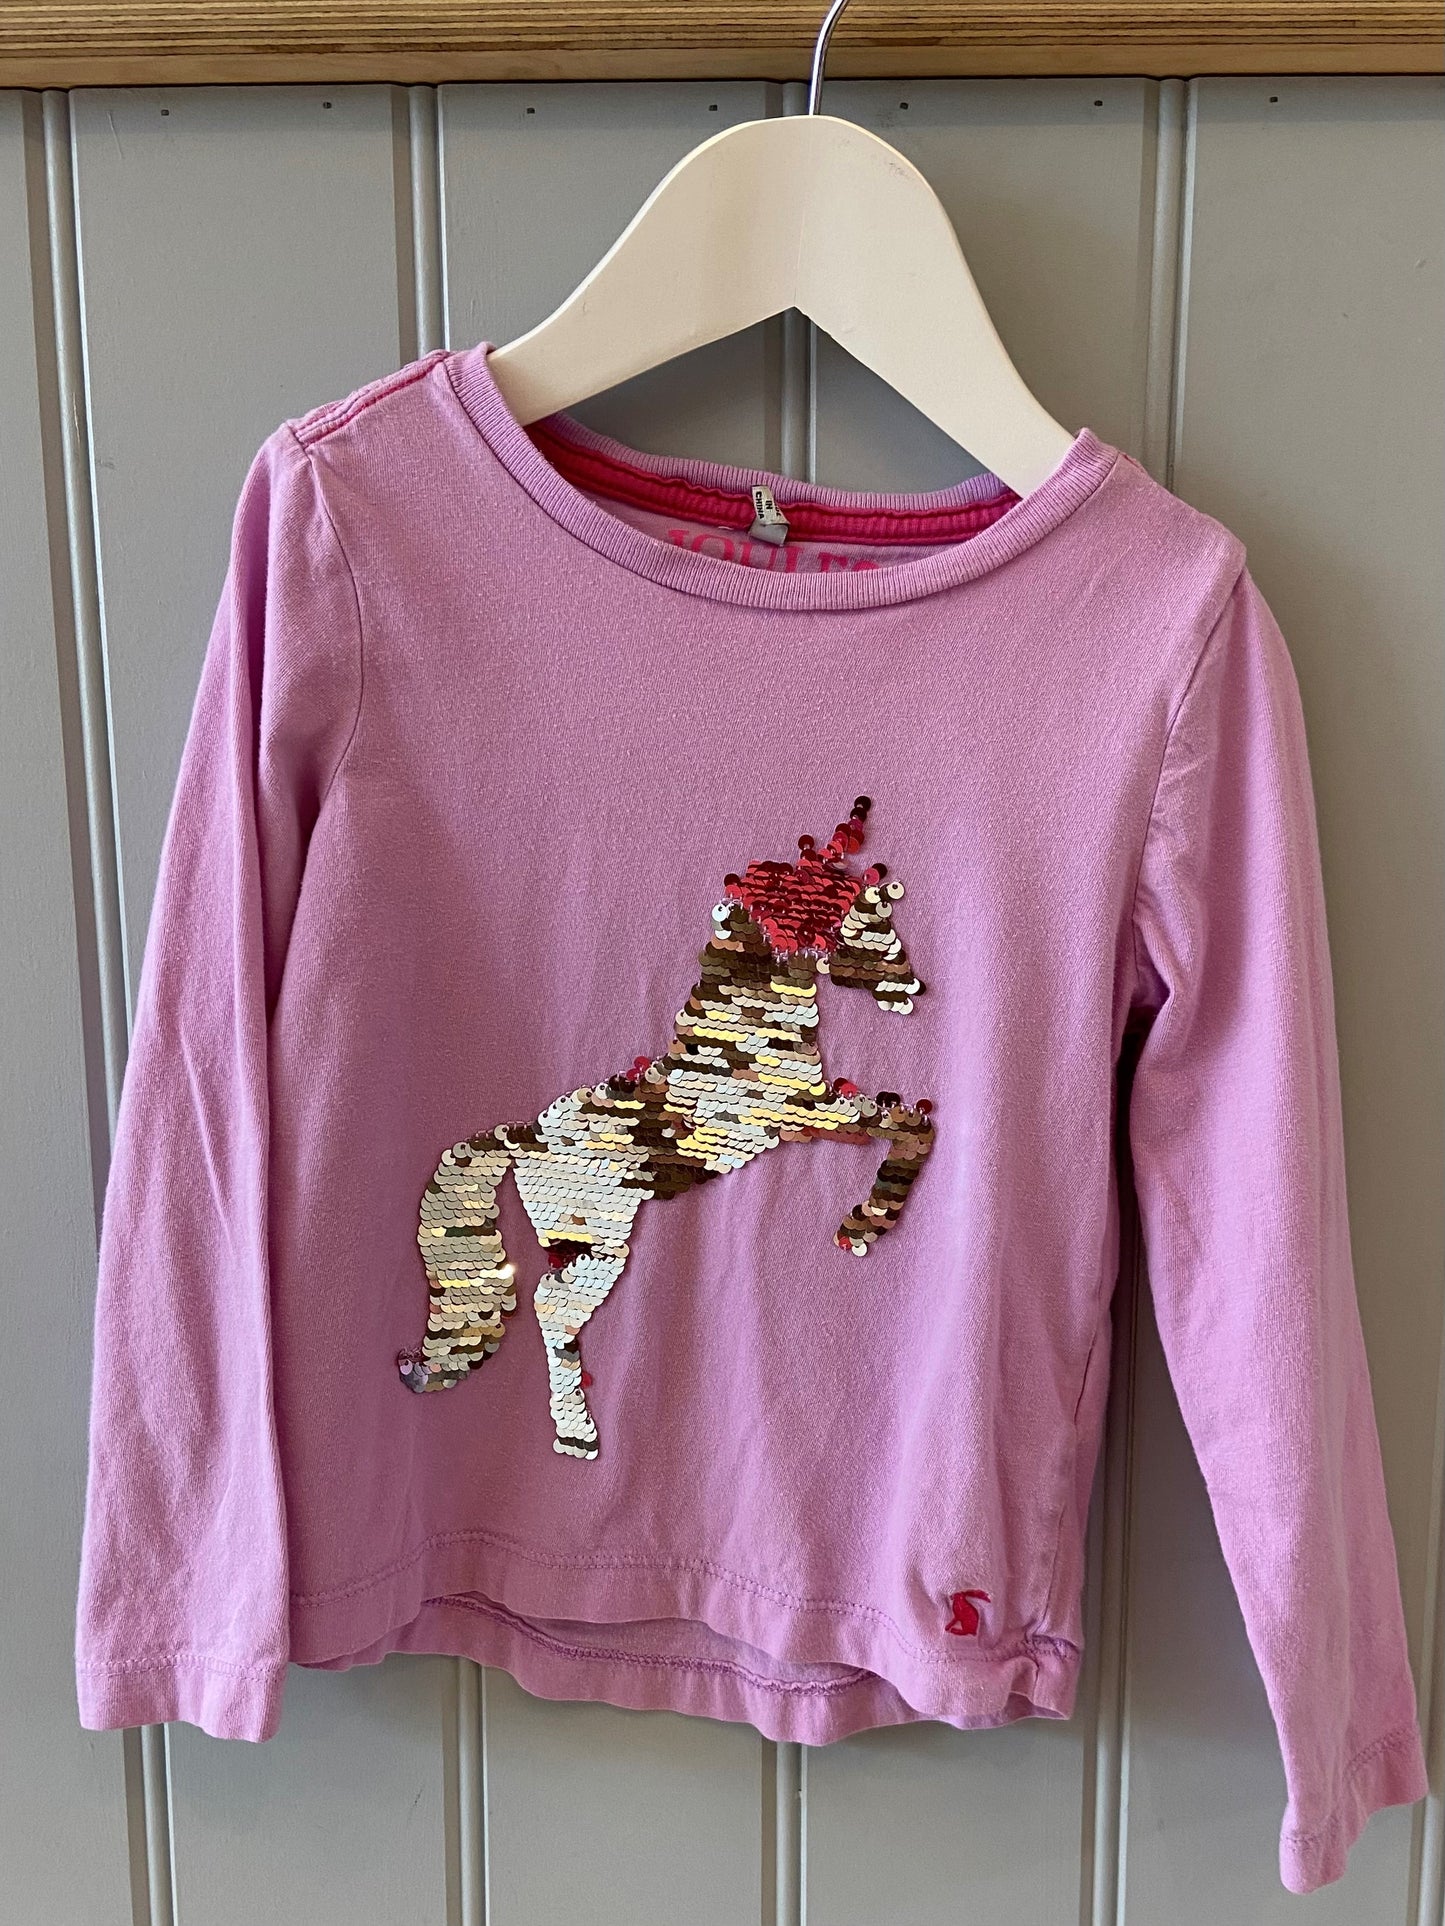 Pre-loved Unicorn Top by Joules